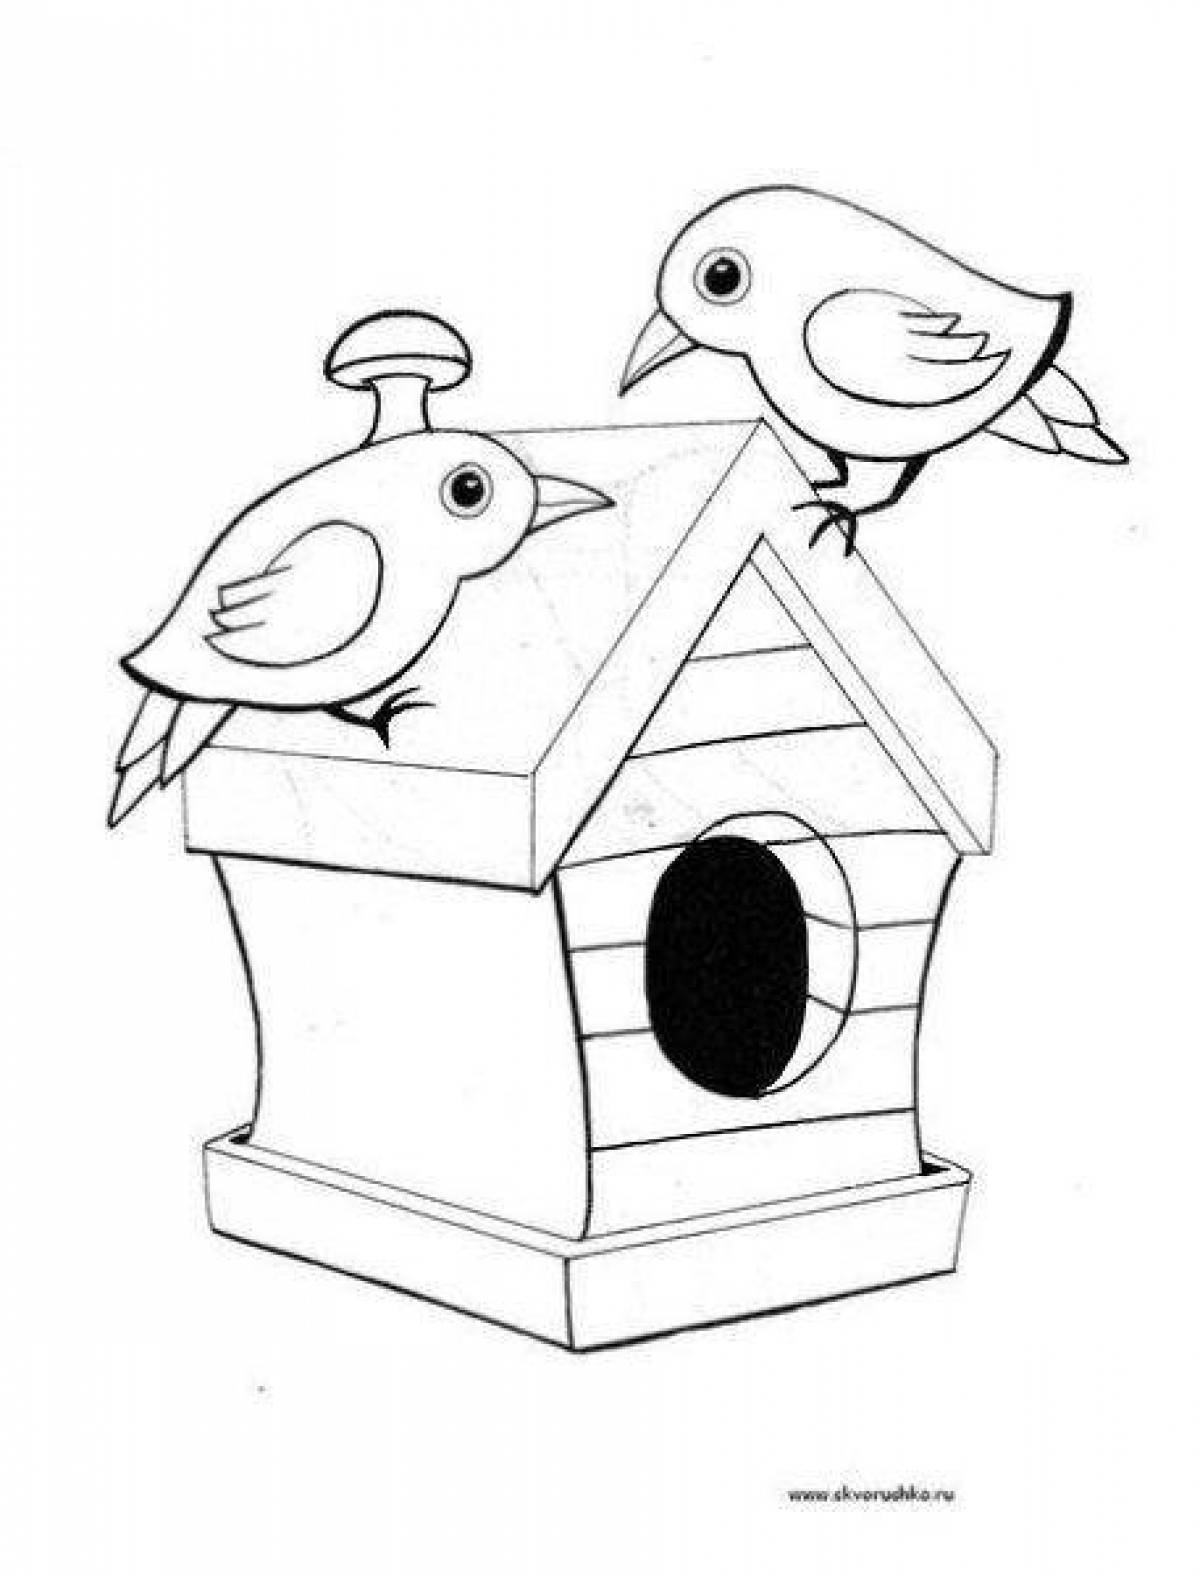 Playful birdhouse coloring page for kids